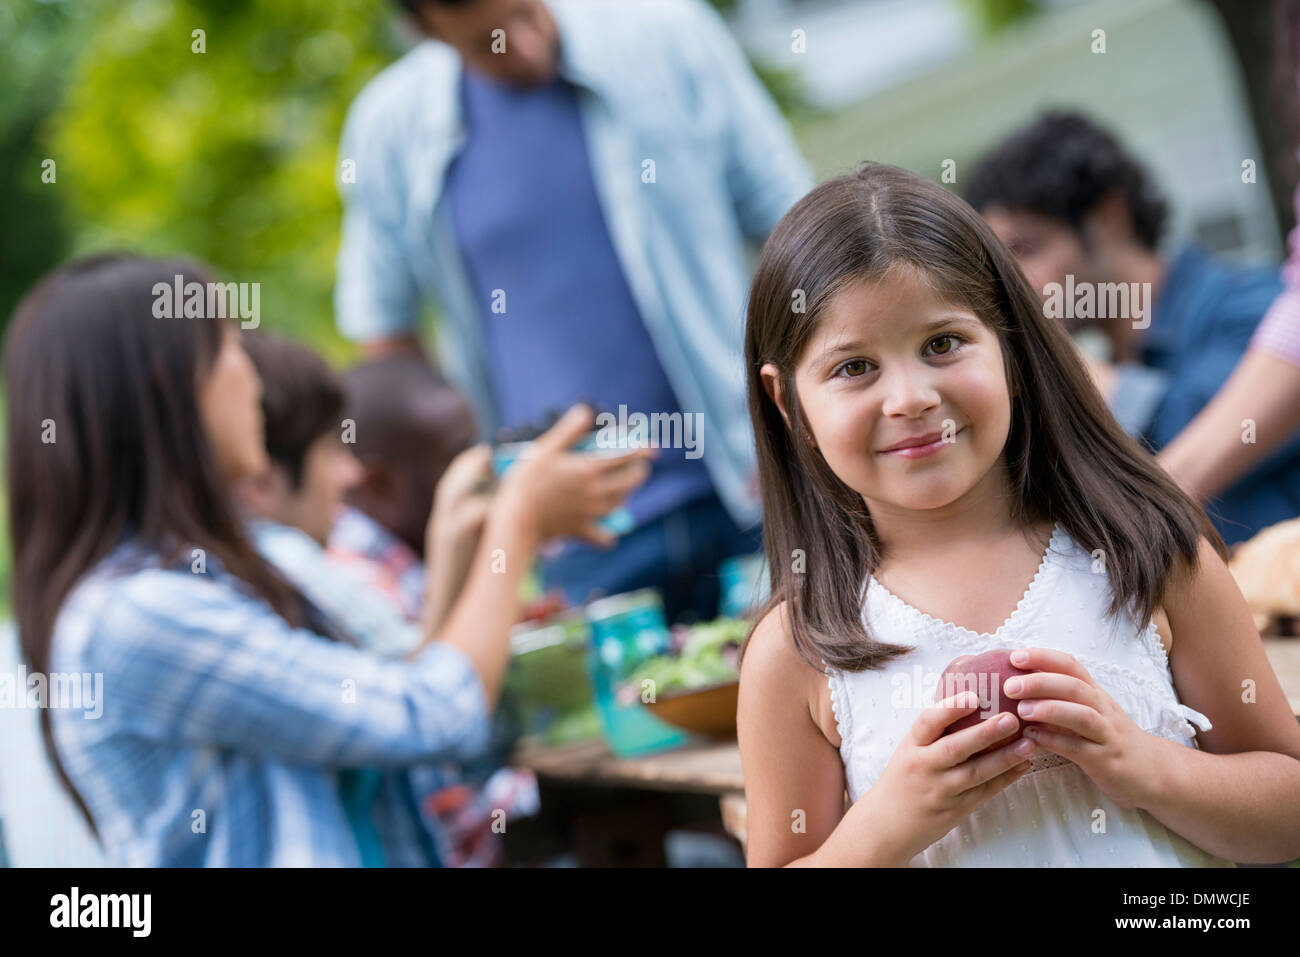 A summer party outdoors. Adults and children around a table. Stock Photo